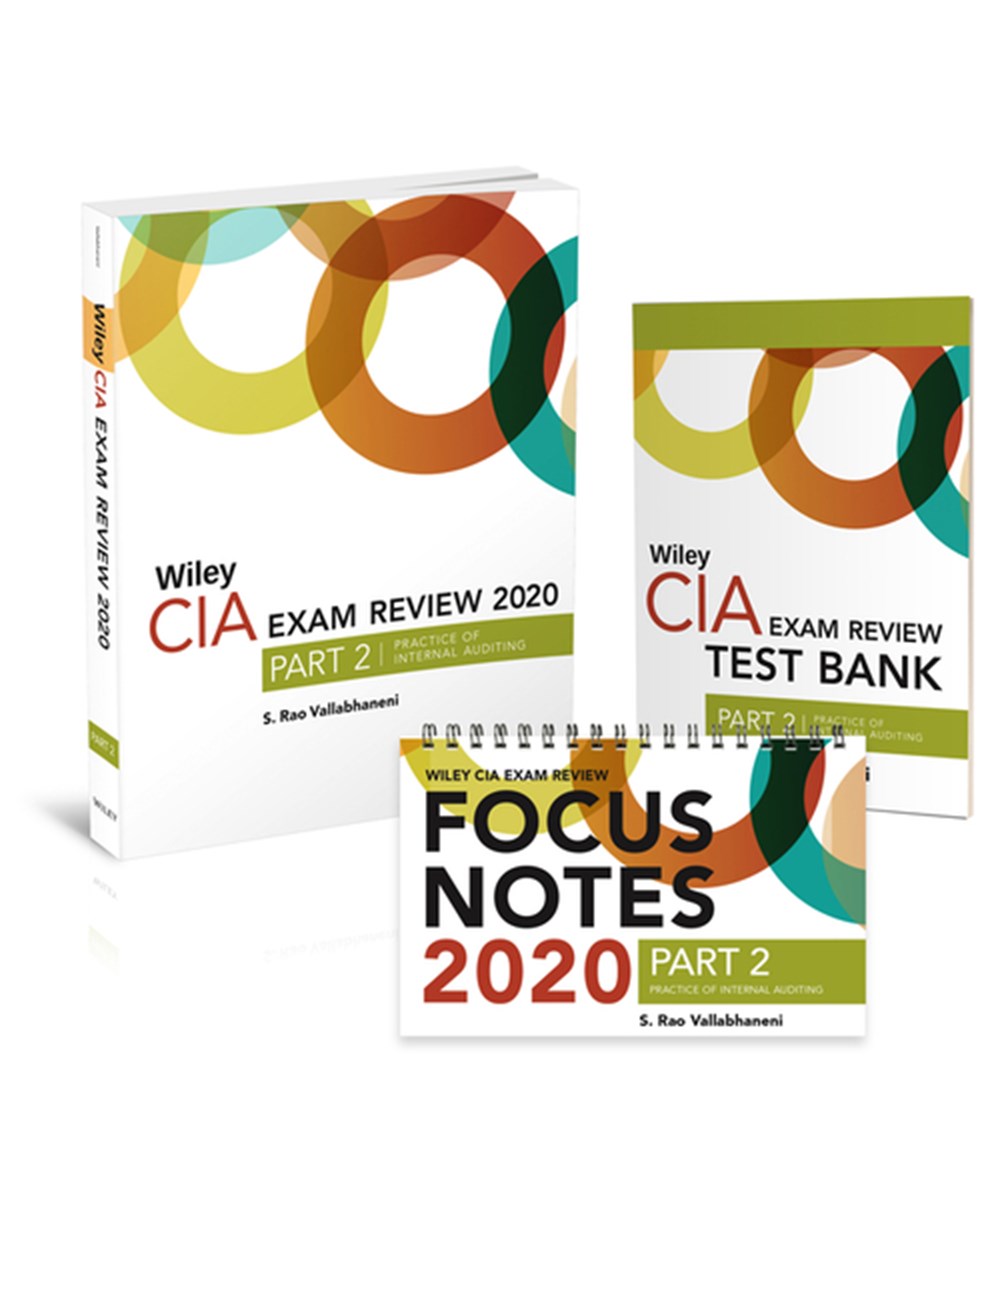 Wiley CIA Exam Review 2020 + Test Bank + Focus Notes Part 2, Practice of Internal Auditing Set